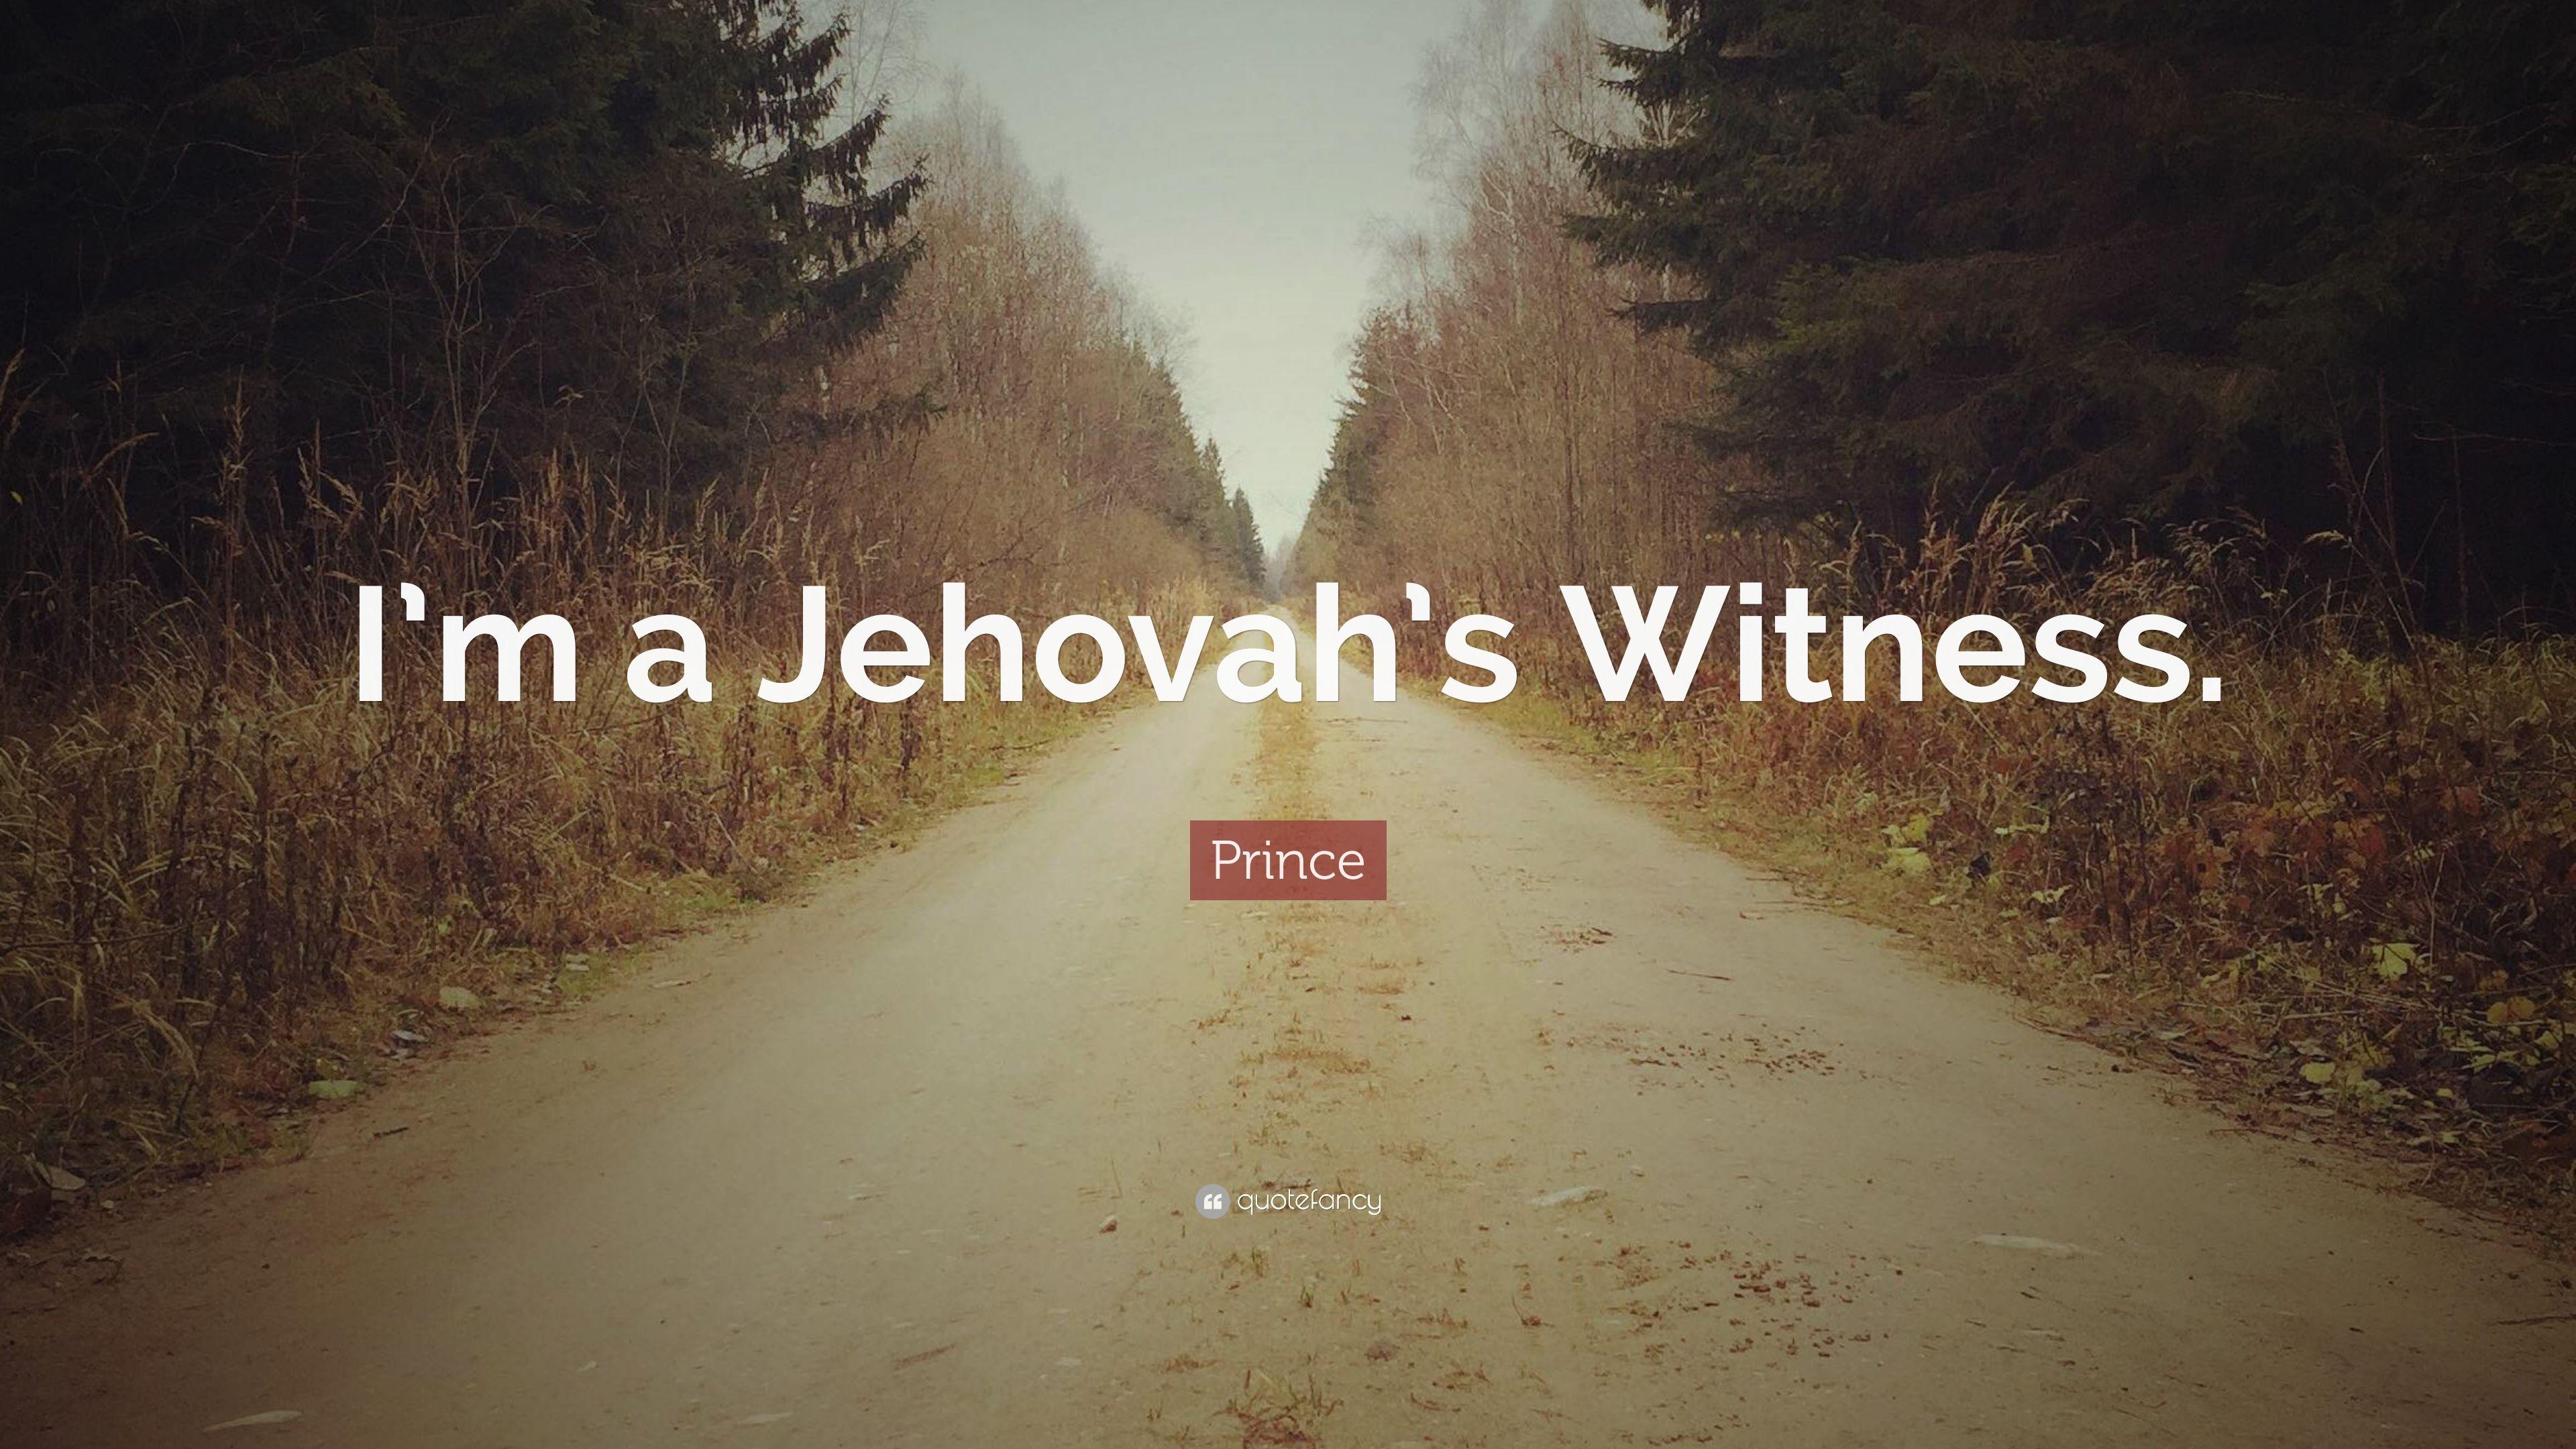 Prince Quote: “I'm a Jehovah's Witness.” (12 wallpaper)